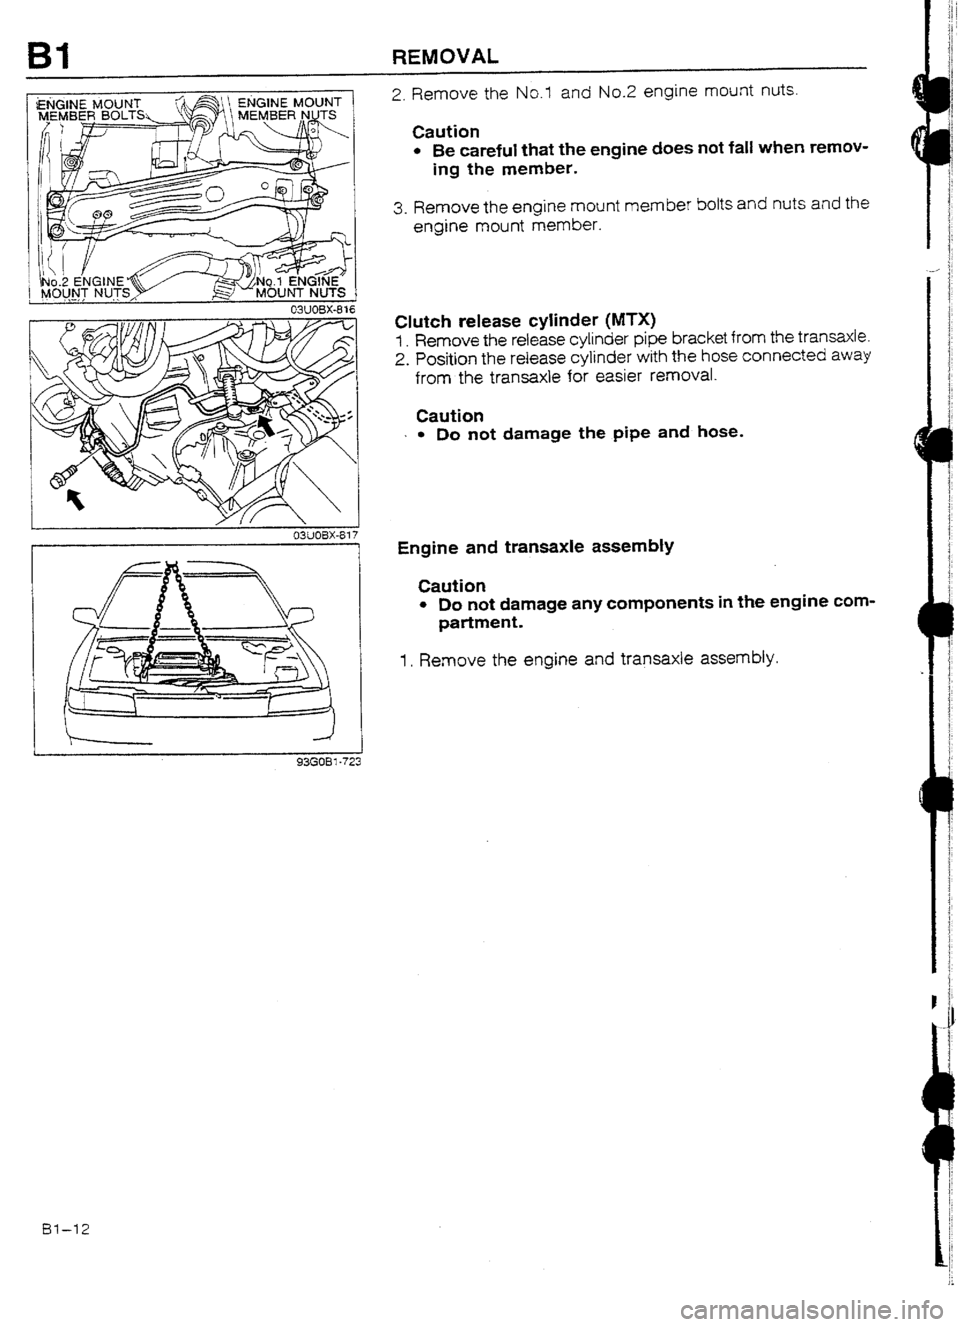 MAZDA 232 1990   Suplement Service Manual Bl REMOVAL 
93GOBl-72: 
2. Remove the No.1 and No.2 engine mount nuts. 
Caution 
l Be careful that the engine does not fall when remov- 
ing the member. 
3. Remove the engine mount member bolts and nu